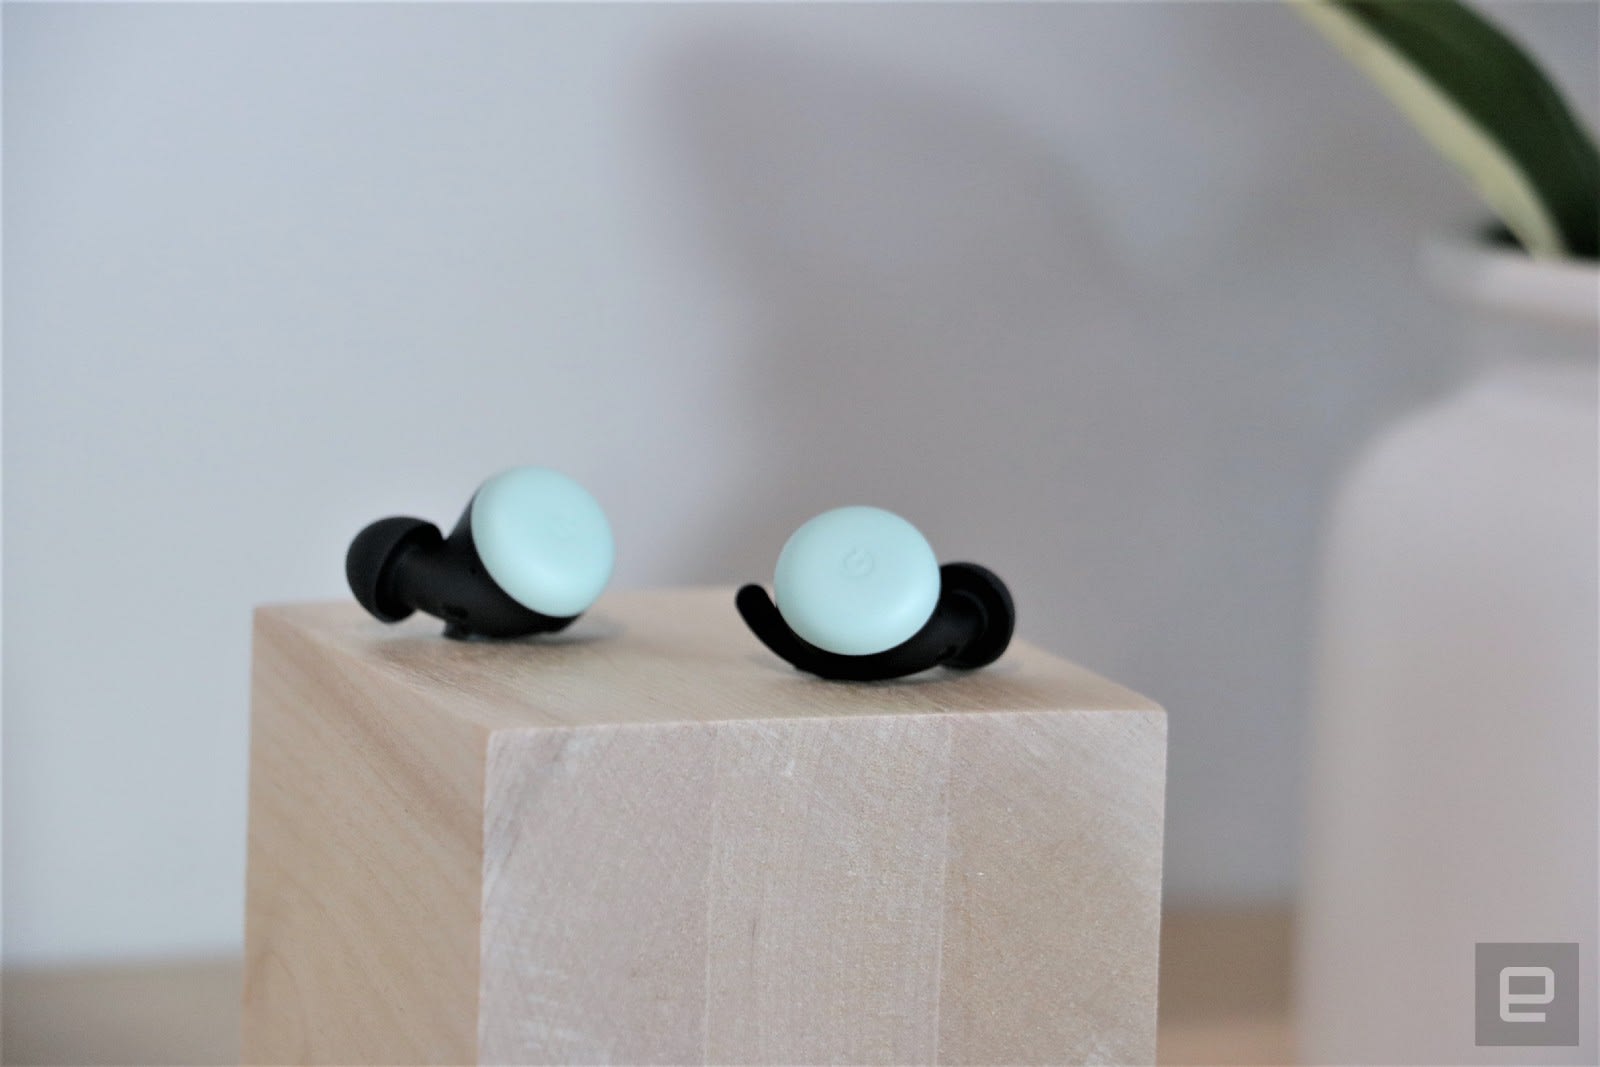 Pixel Buds 2020 first look